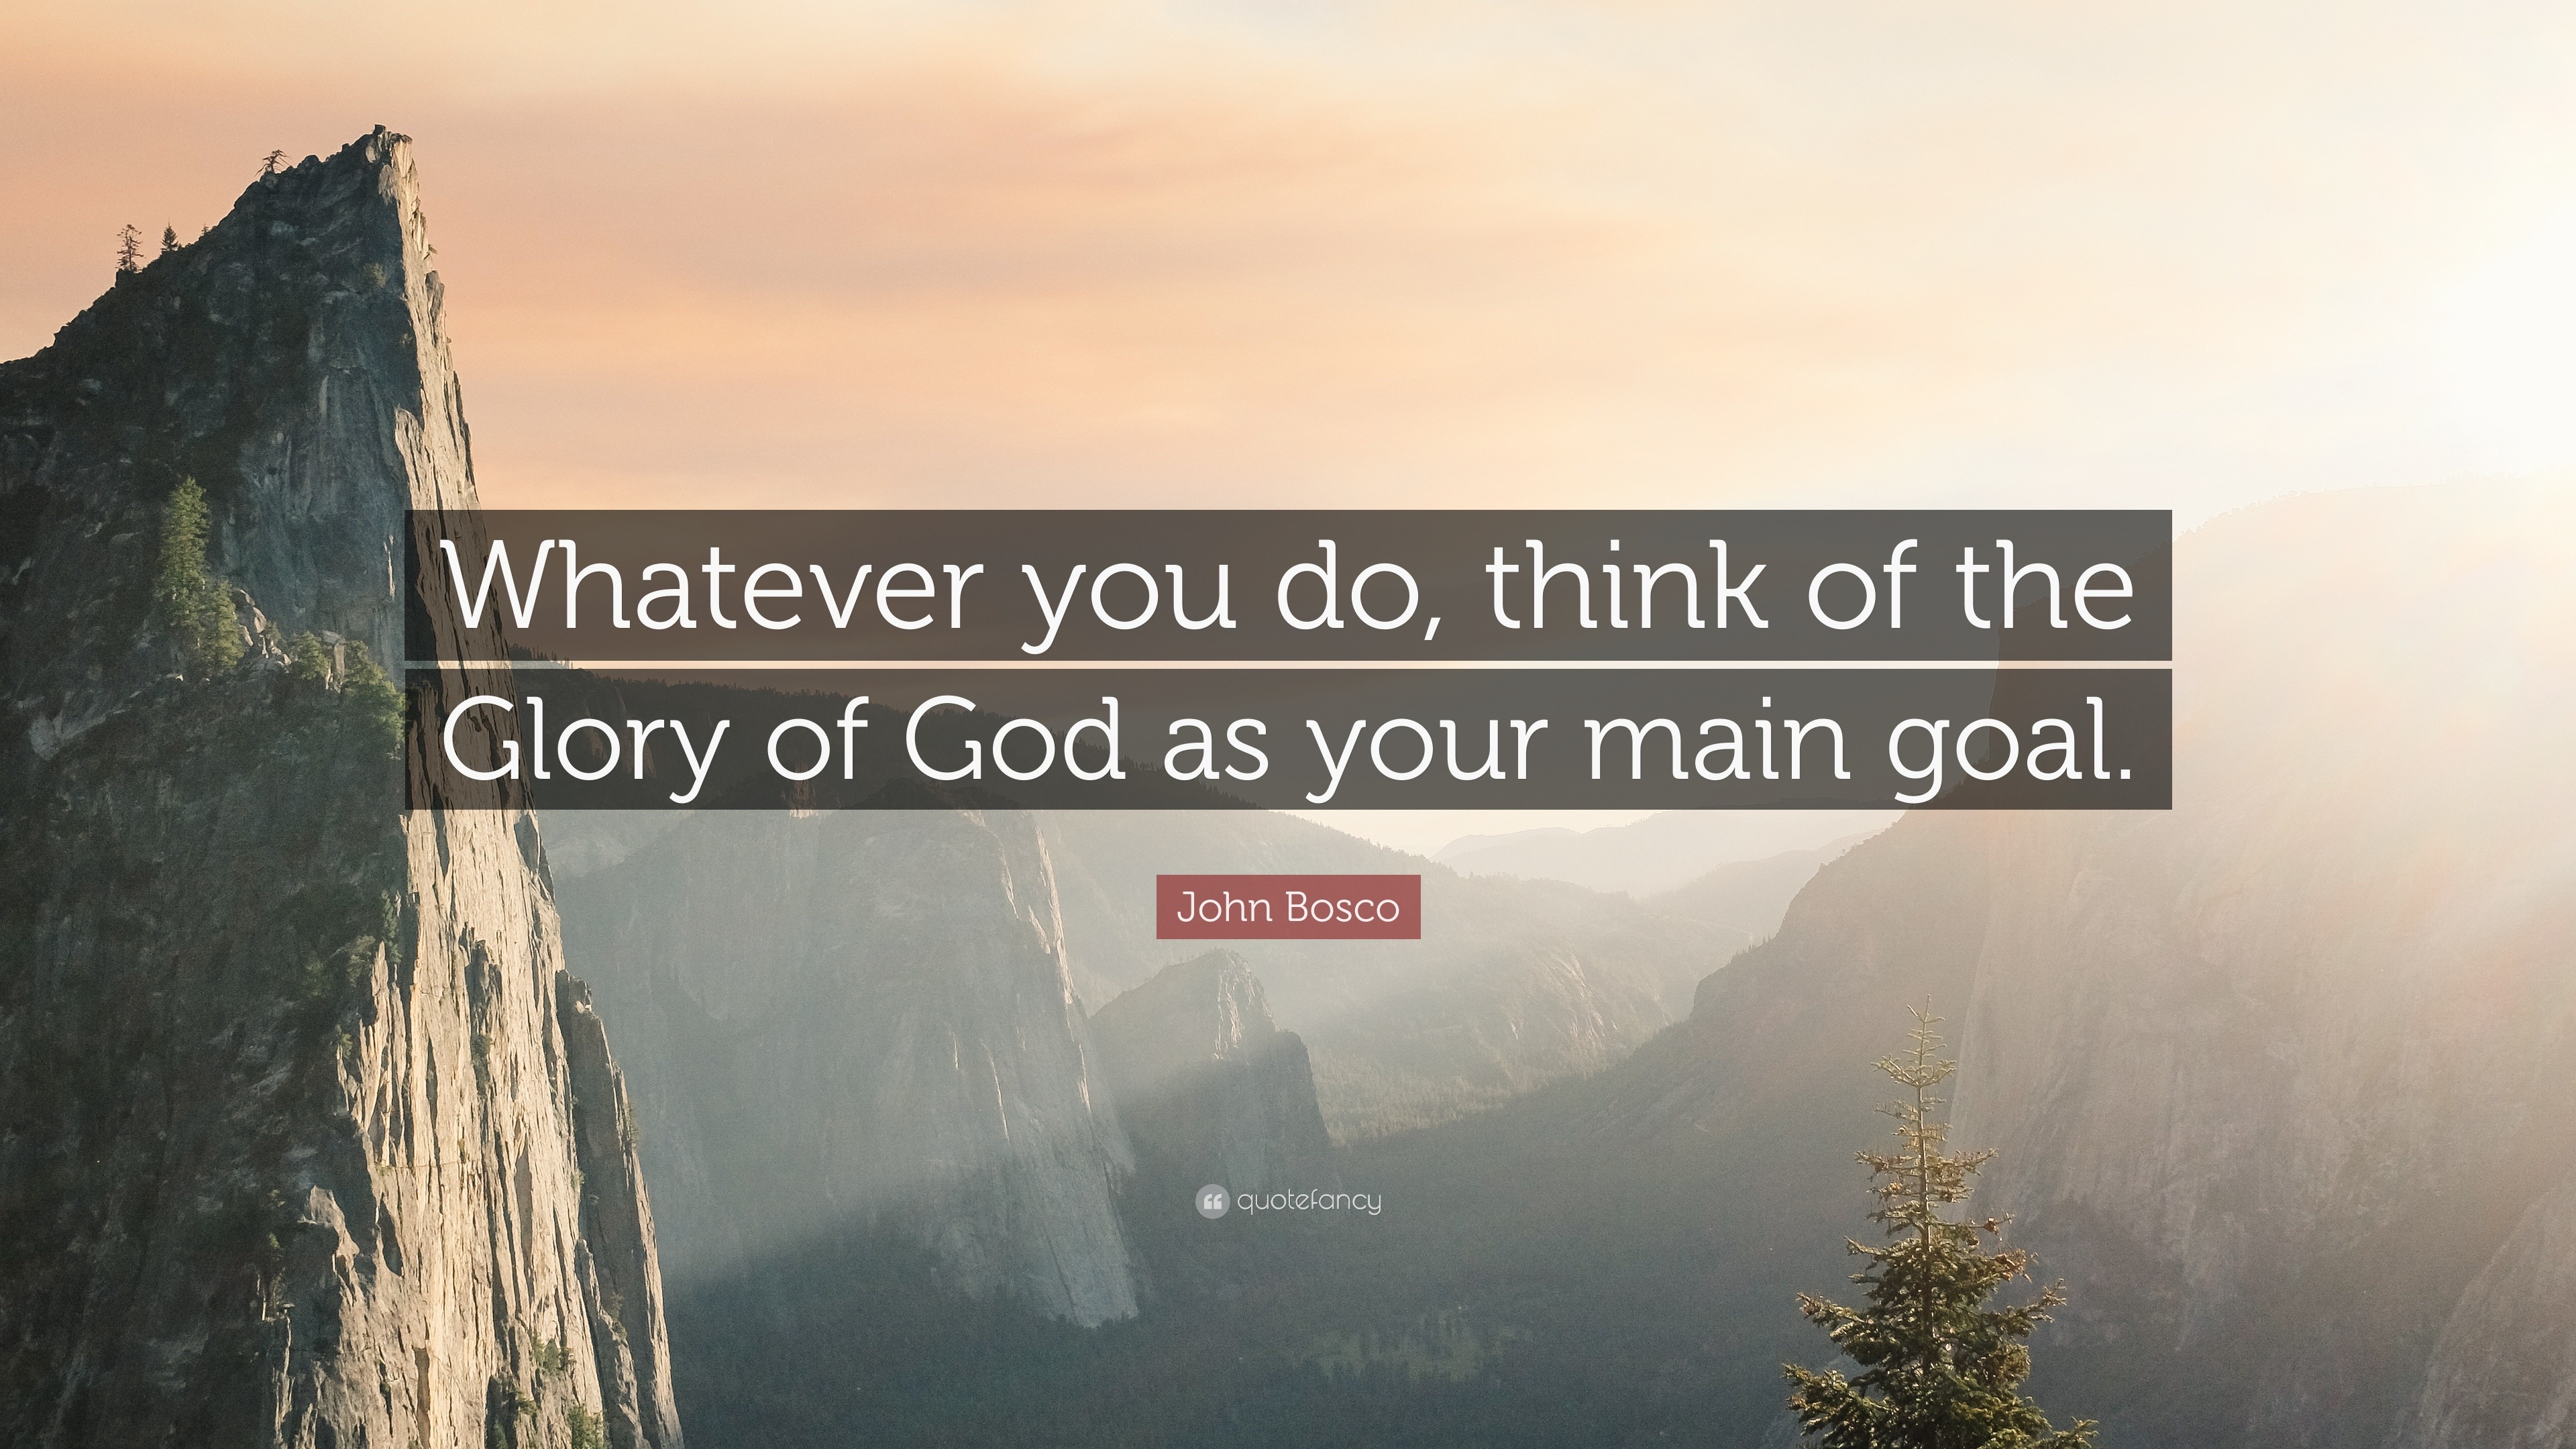 John Bosco Quote: “Whatever you do, think of the Glory of God as your